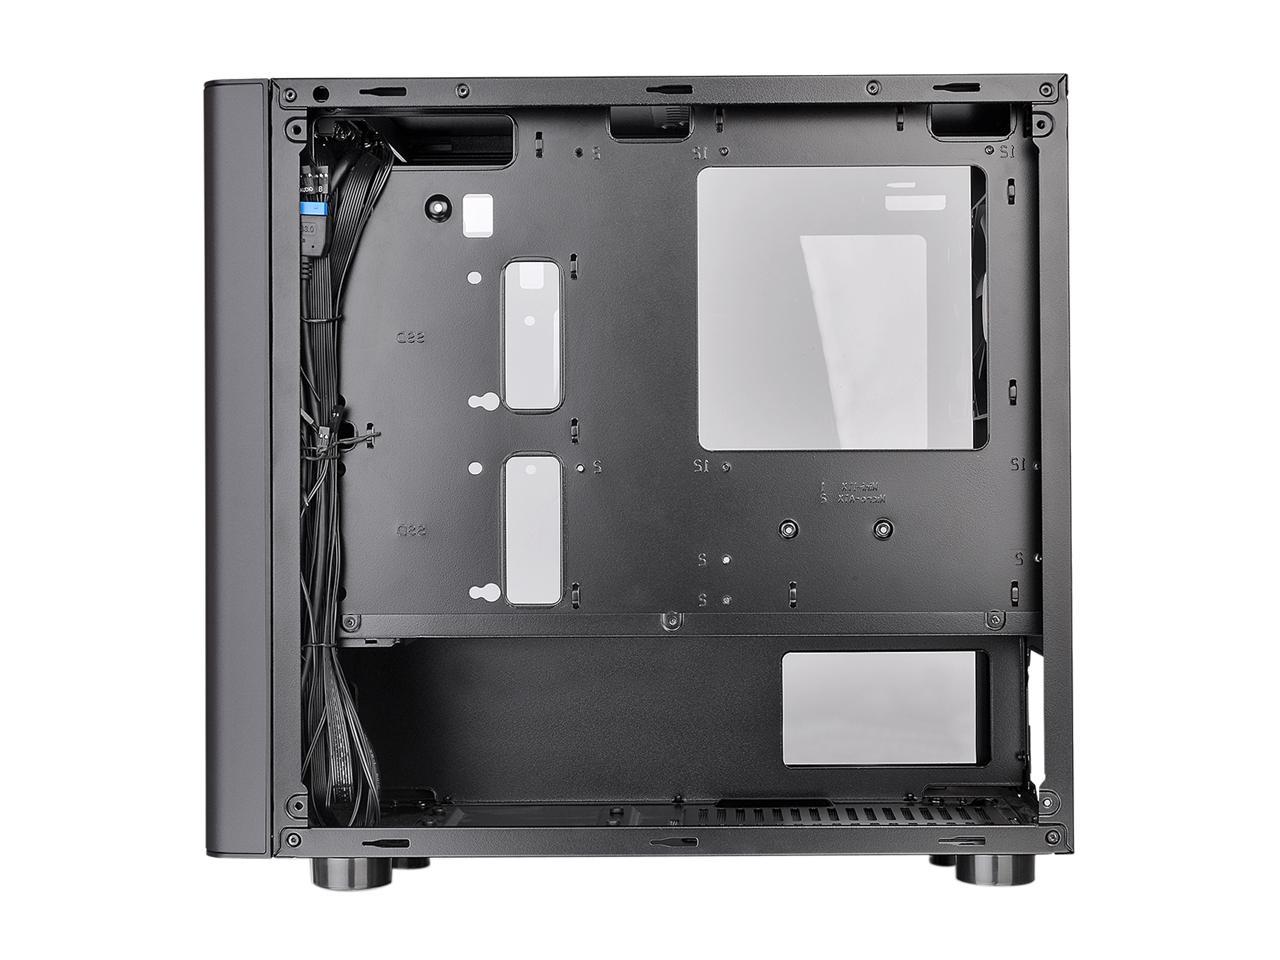 Thermaltake V150 Tempered Glass Micro-ATX Mini Tower Gaming Computer Case with One 120mm Rear Fan Pre-Installed CA-1R1-00S1WN-00